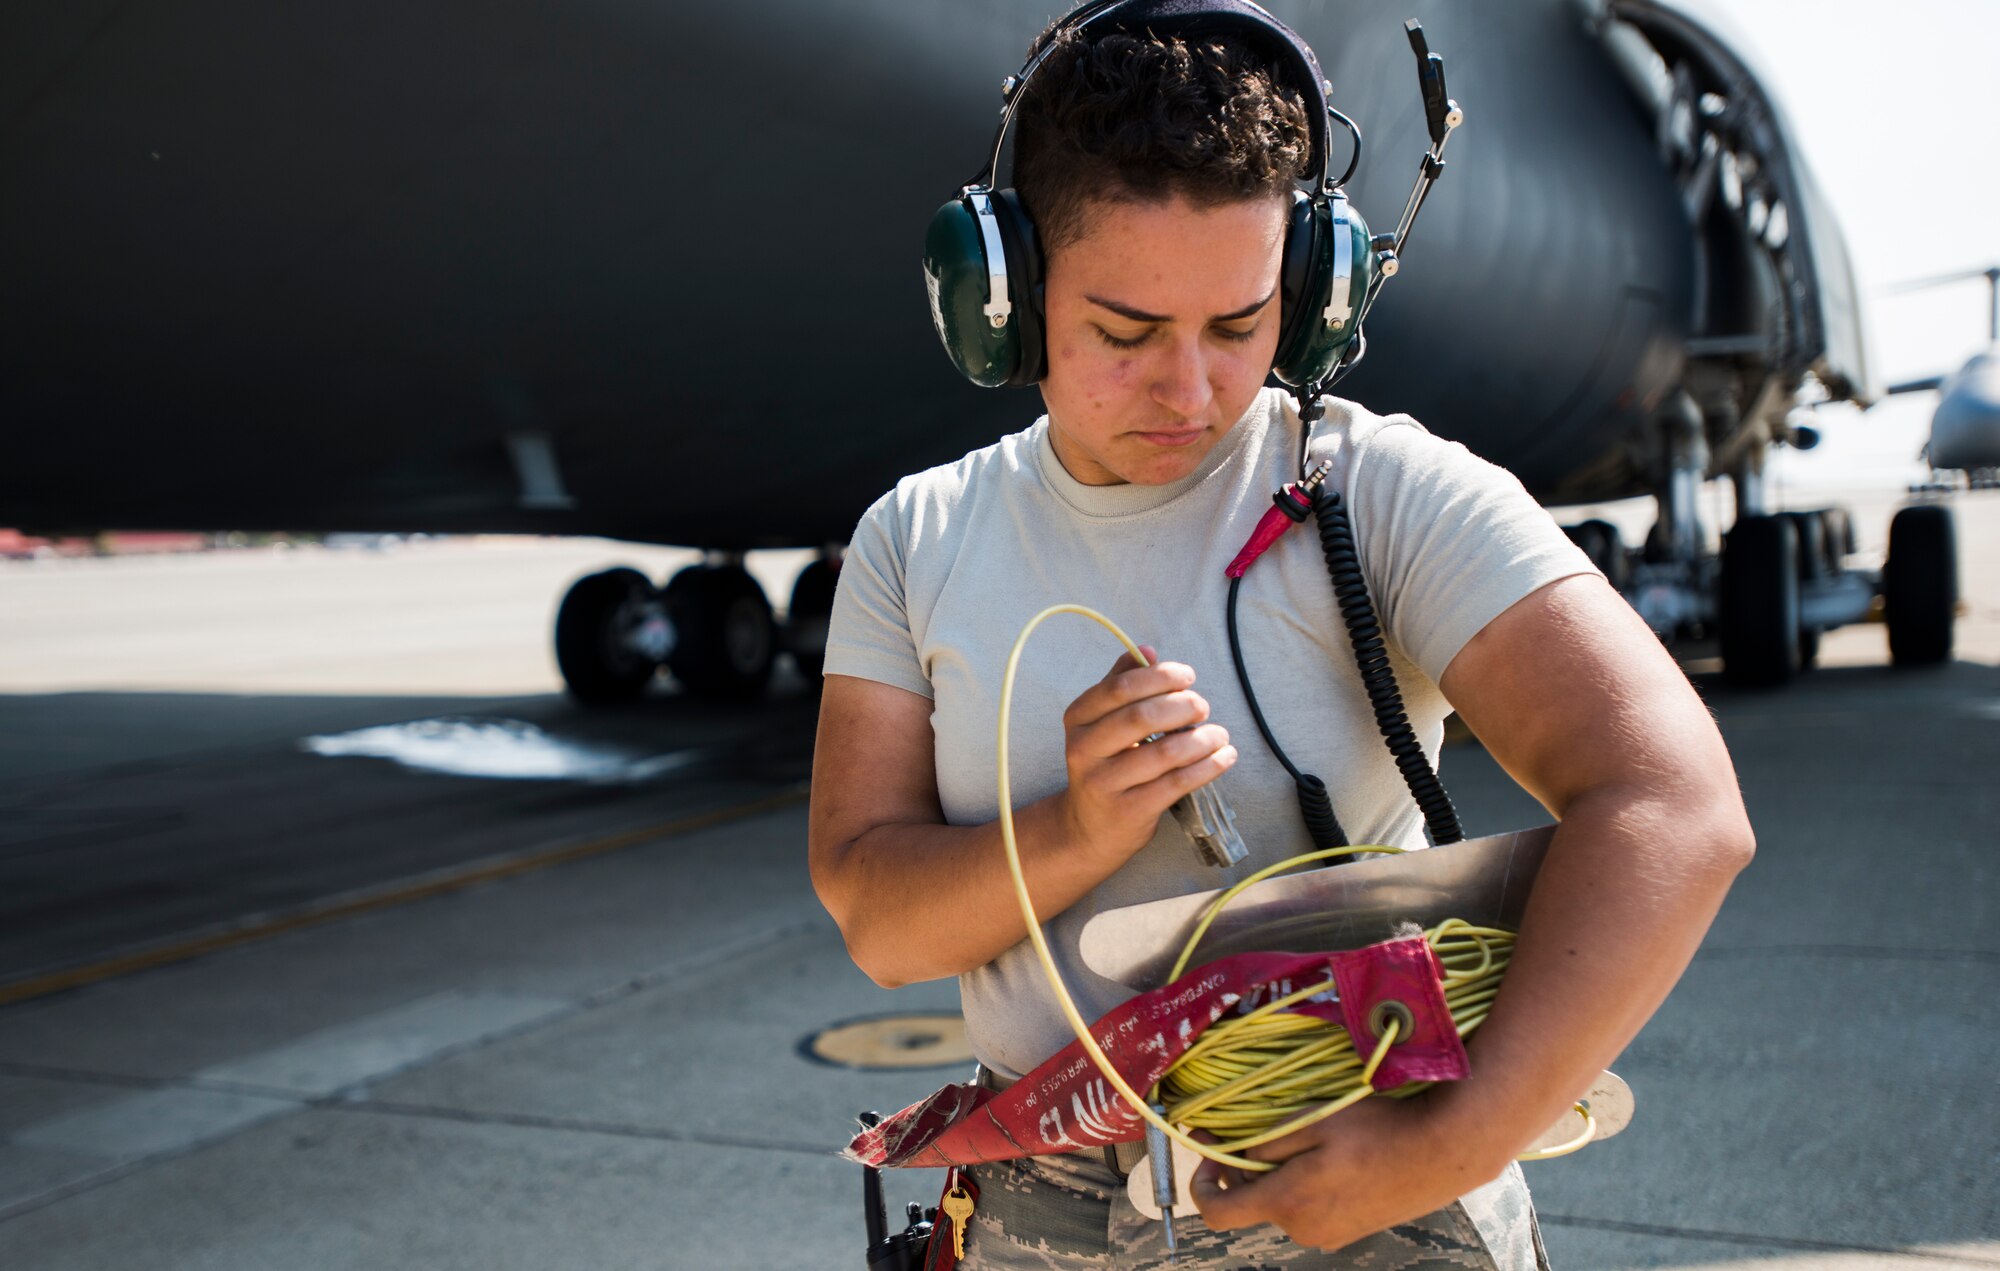 Airman 1st Class Tatiana Orr, 60th Aircraft Maintenance Squadron crew chief, wraps power chords prior to the launch of C-5M Super Galaxy on Aug. 12, 2018, at Travis Air Force Base, Calif. The 349th and 60th AMXS work together to launch aircraft in a seemless active duty and Air Force Reserve integration.